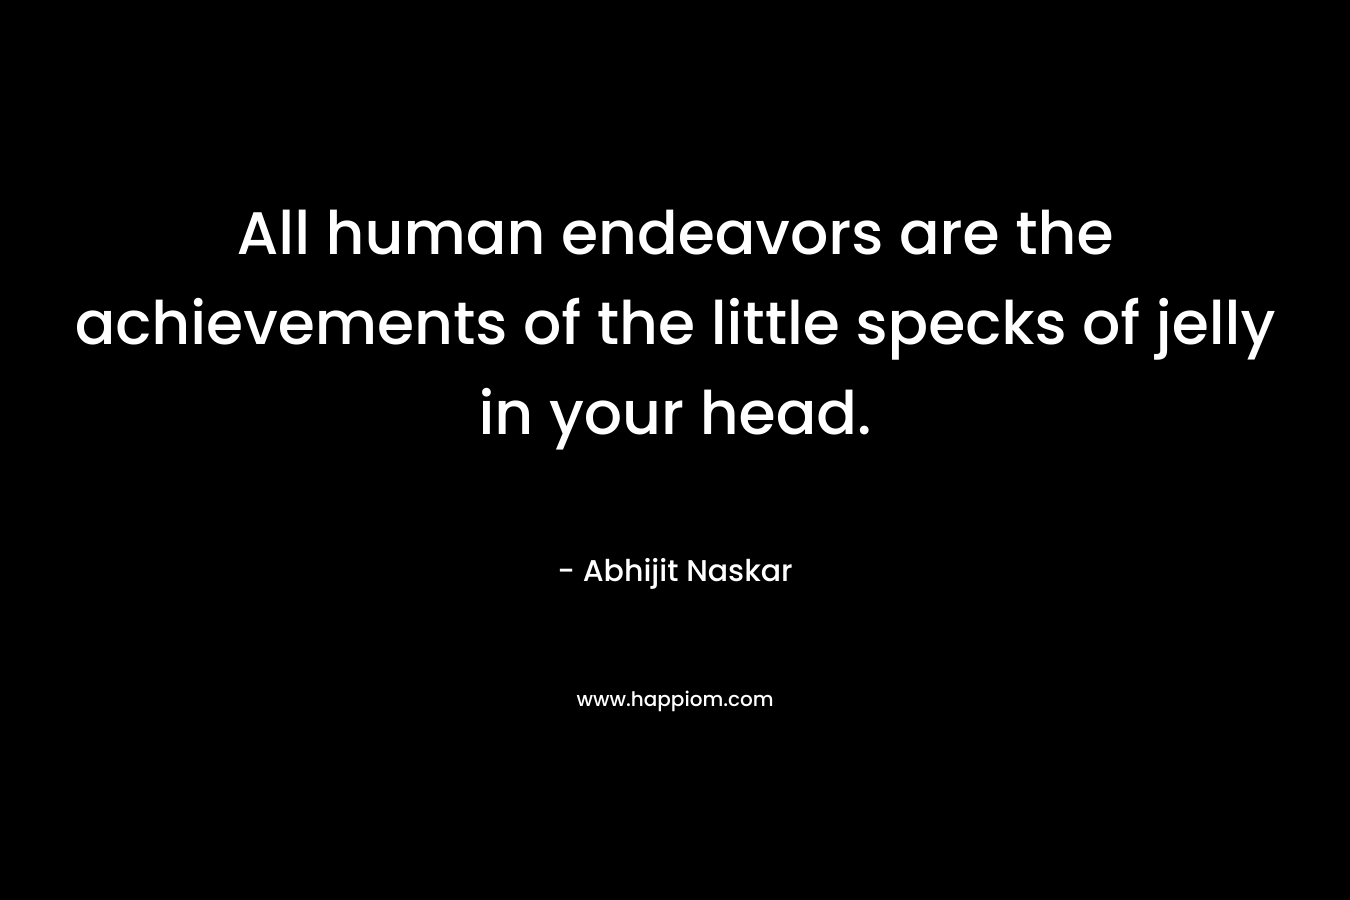 All human endeavors are the achievements of the little specks of jelly in your head.